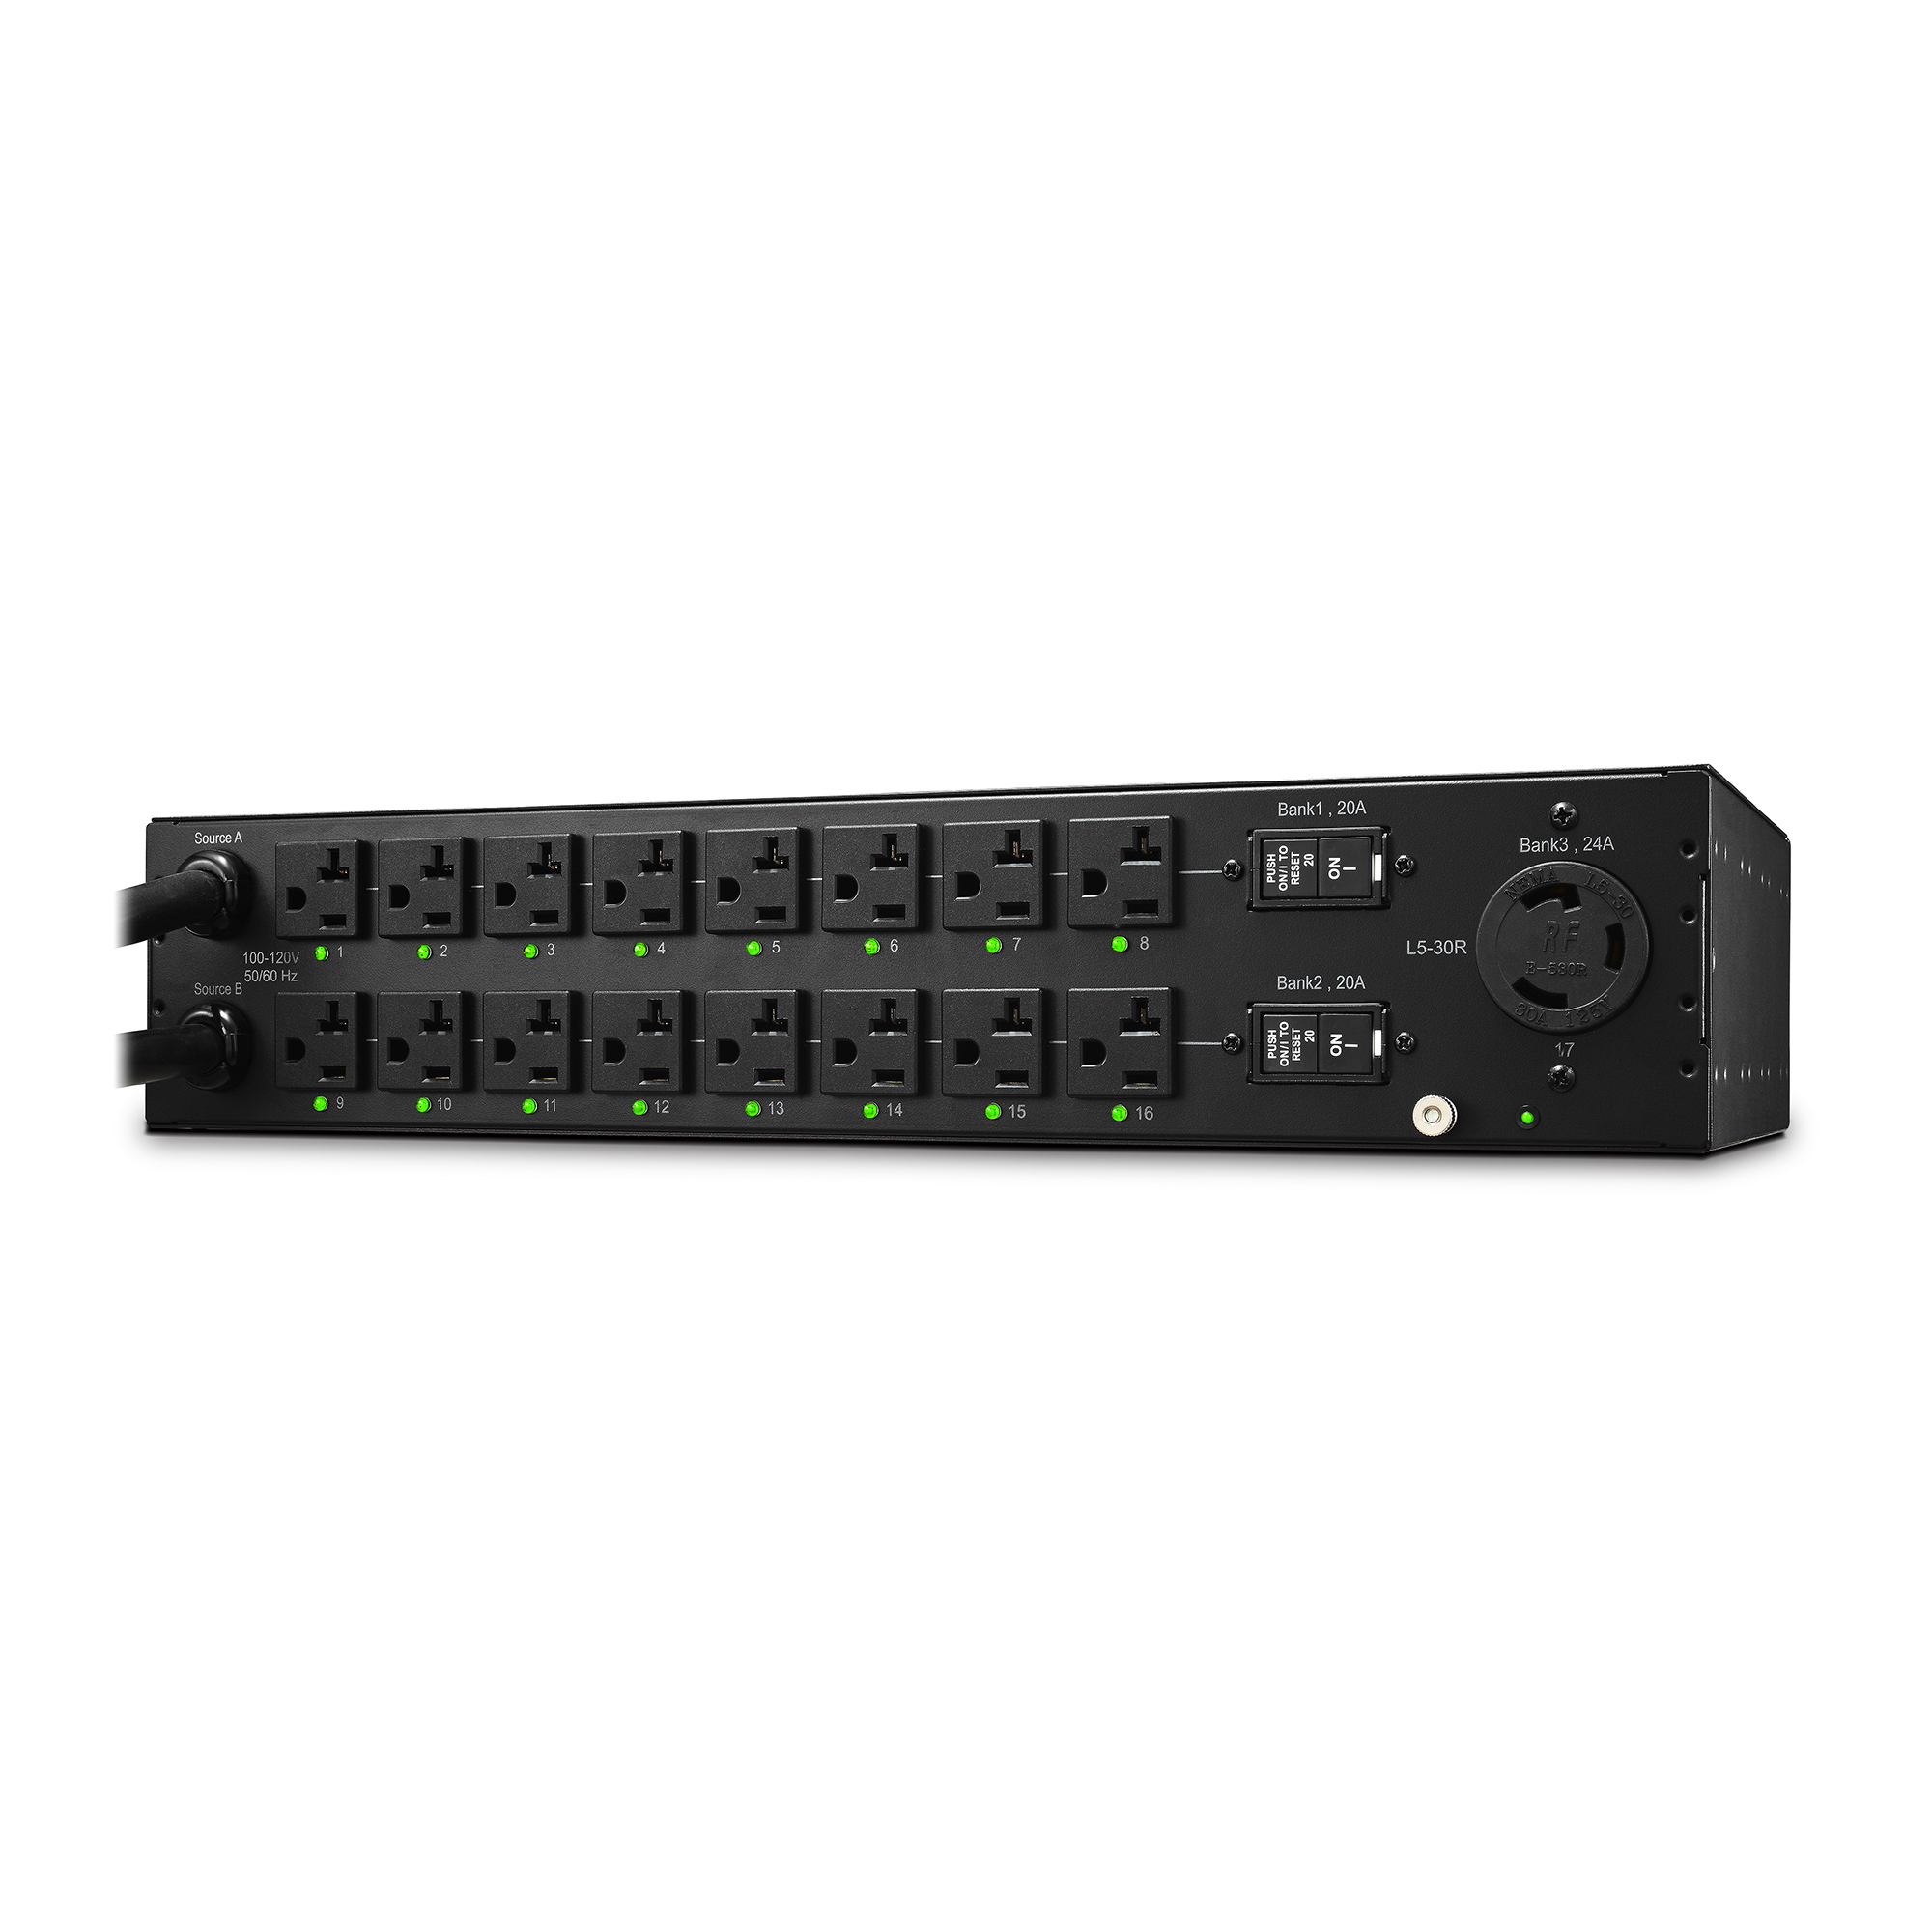 2U Rackmount 100-120V/30A CyberPower PDU30MT17AT Metered ATS PDU 17 Outlets 